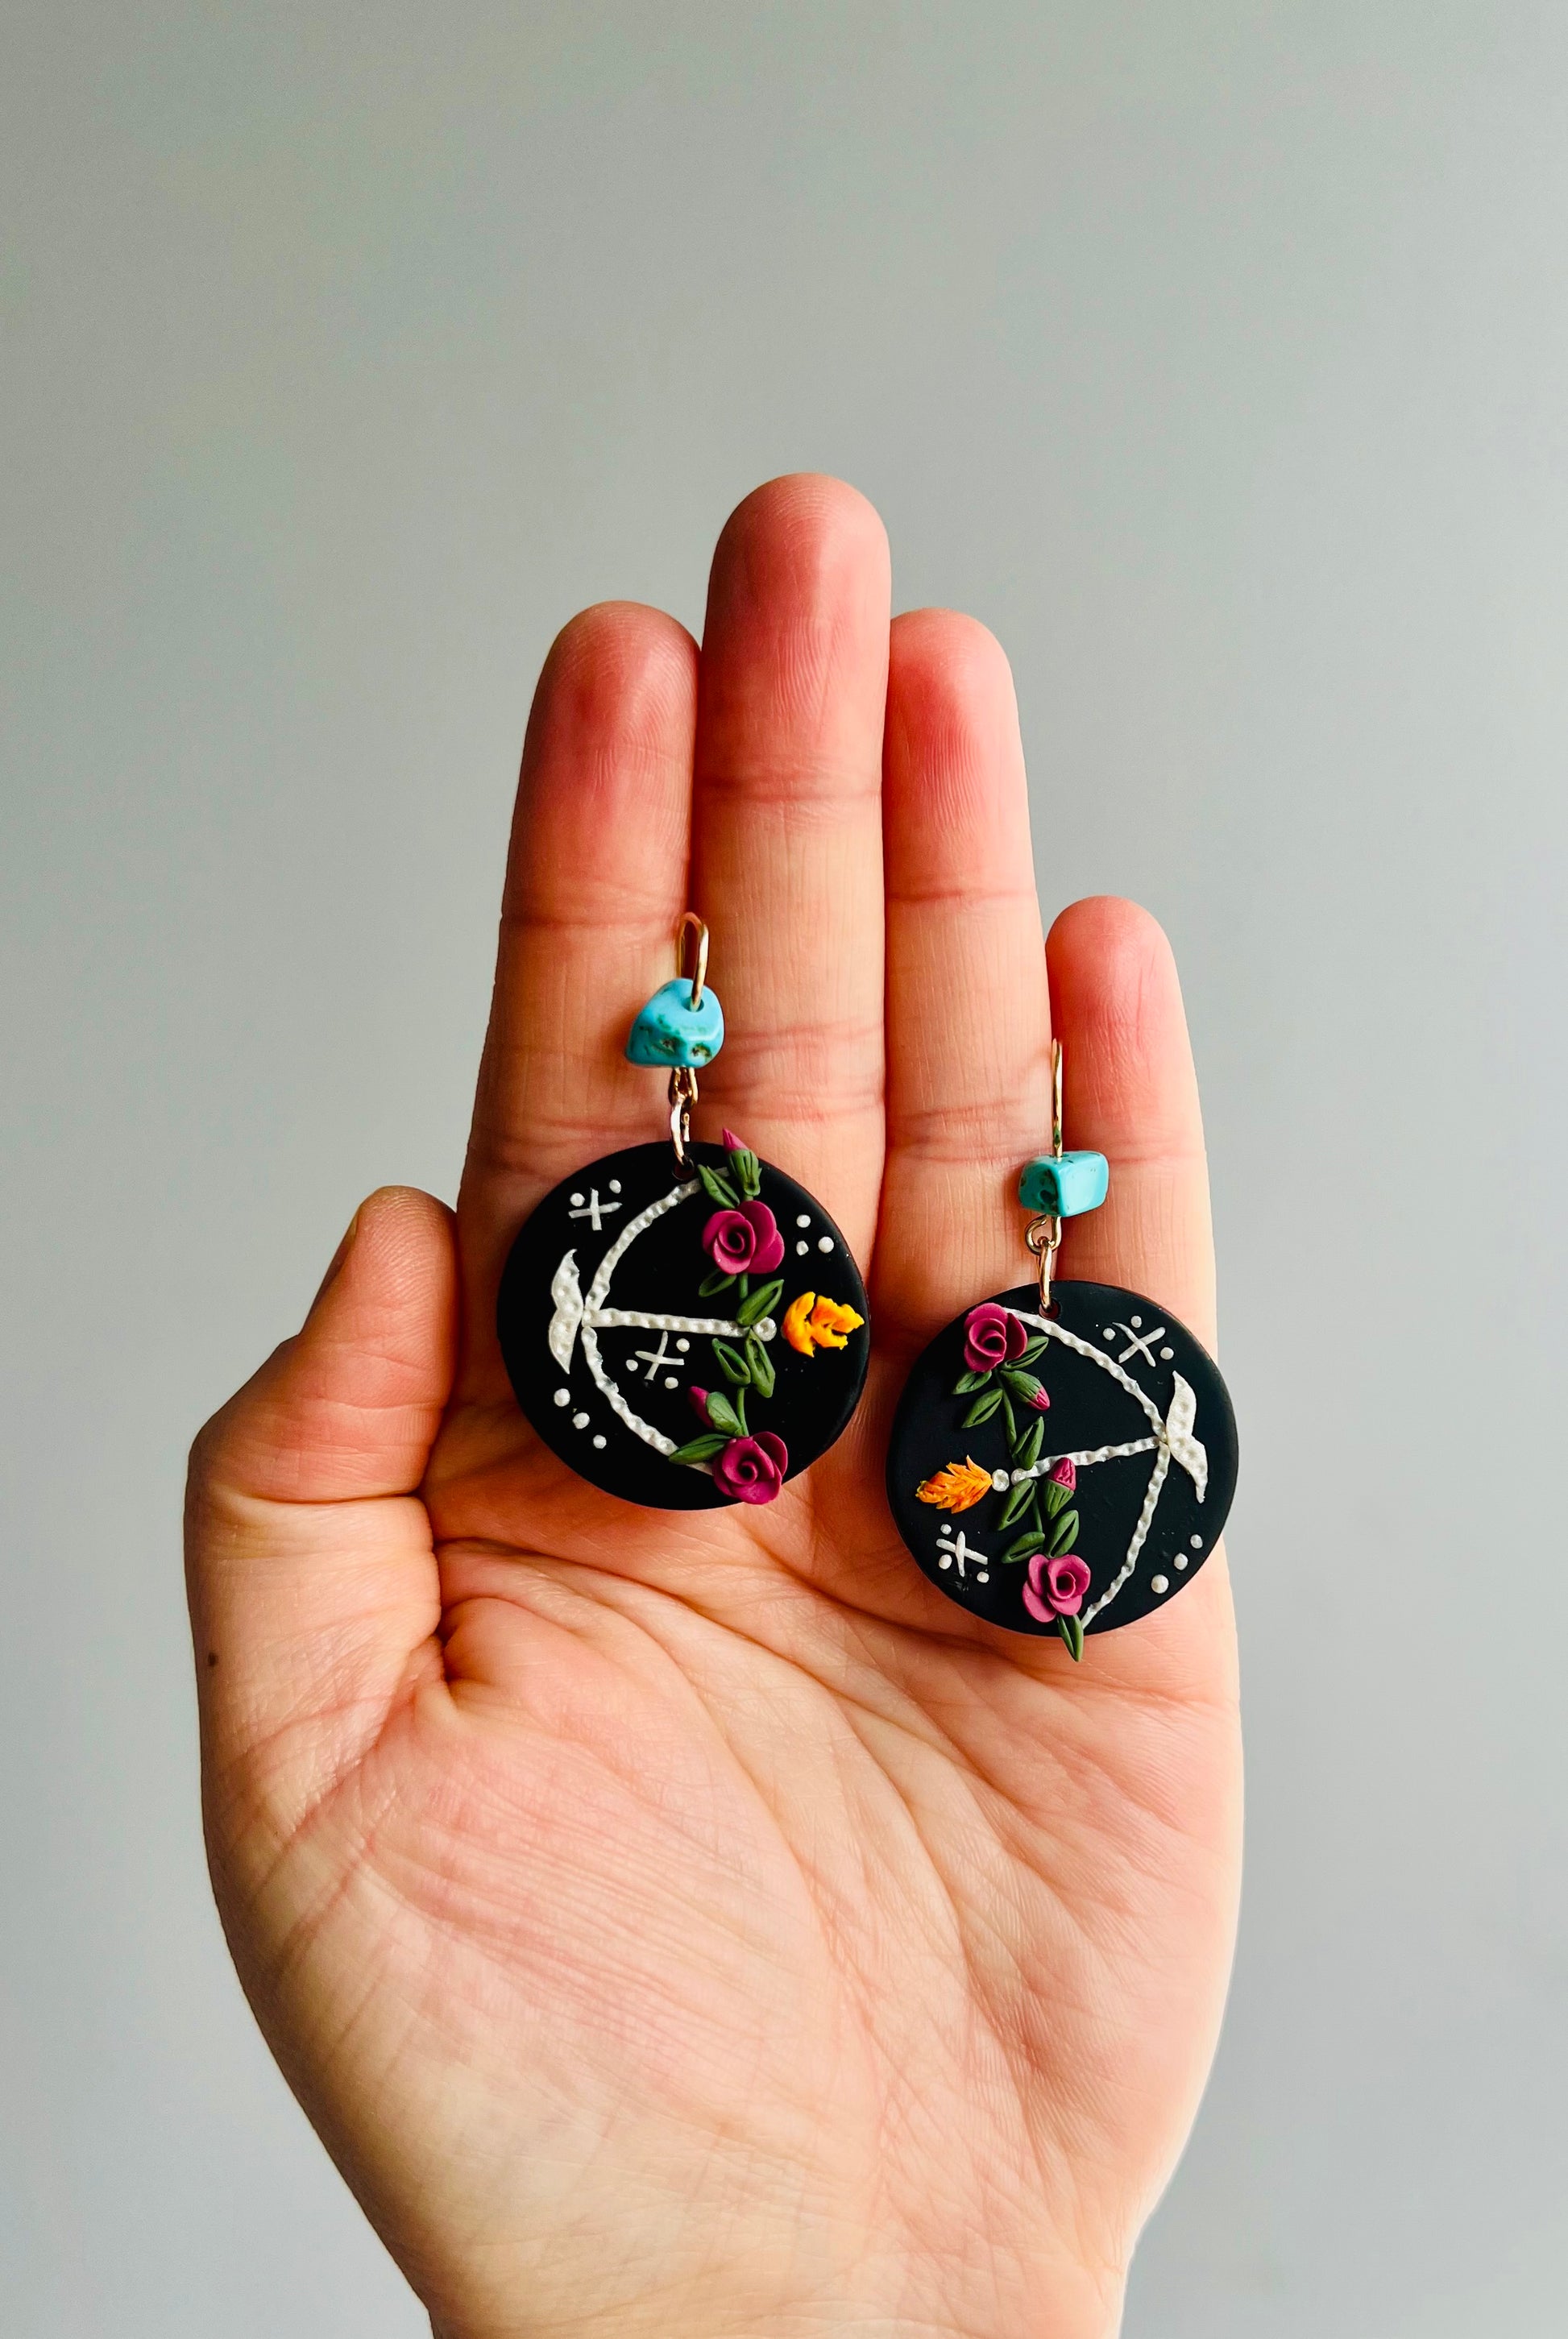 Eye-catching polymer clay Sagittarius zodiac earrings featuring turquoise accents, depicted by a charming bow and arrow design. Handcrafted with care, these earrings capture the adventurous and free-spirited essence of Sagittarius. hop now for a stylish expression of your zodiac sign!